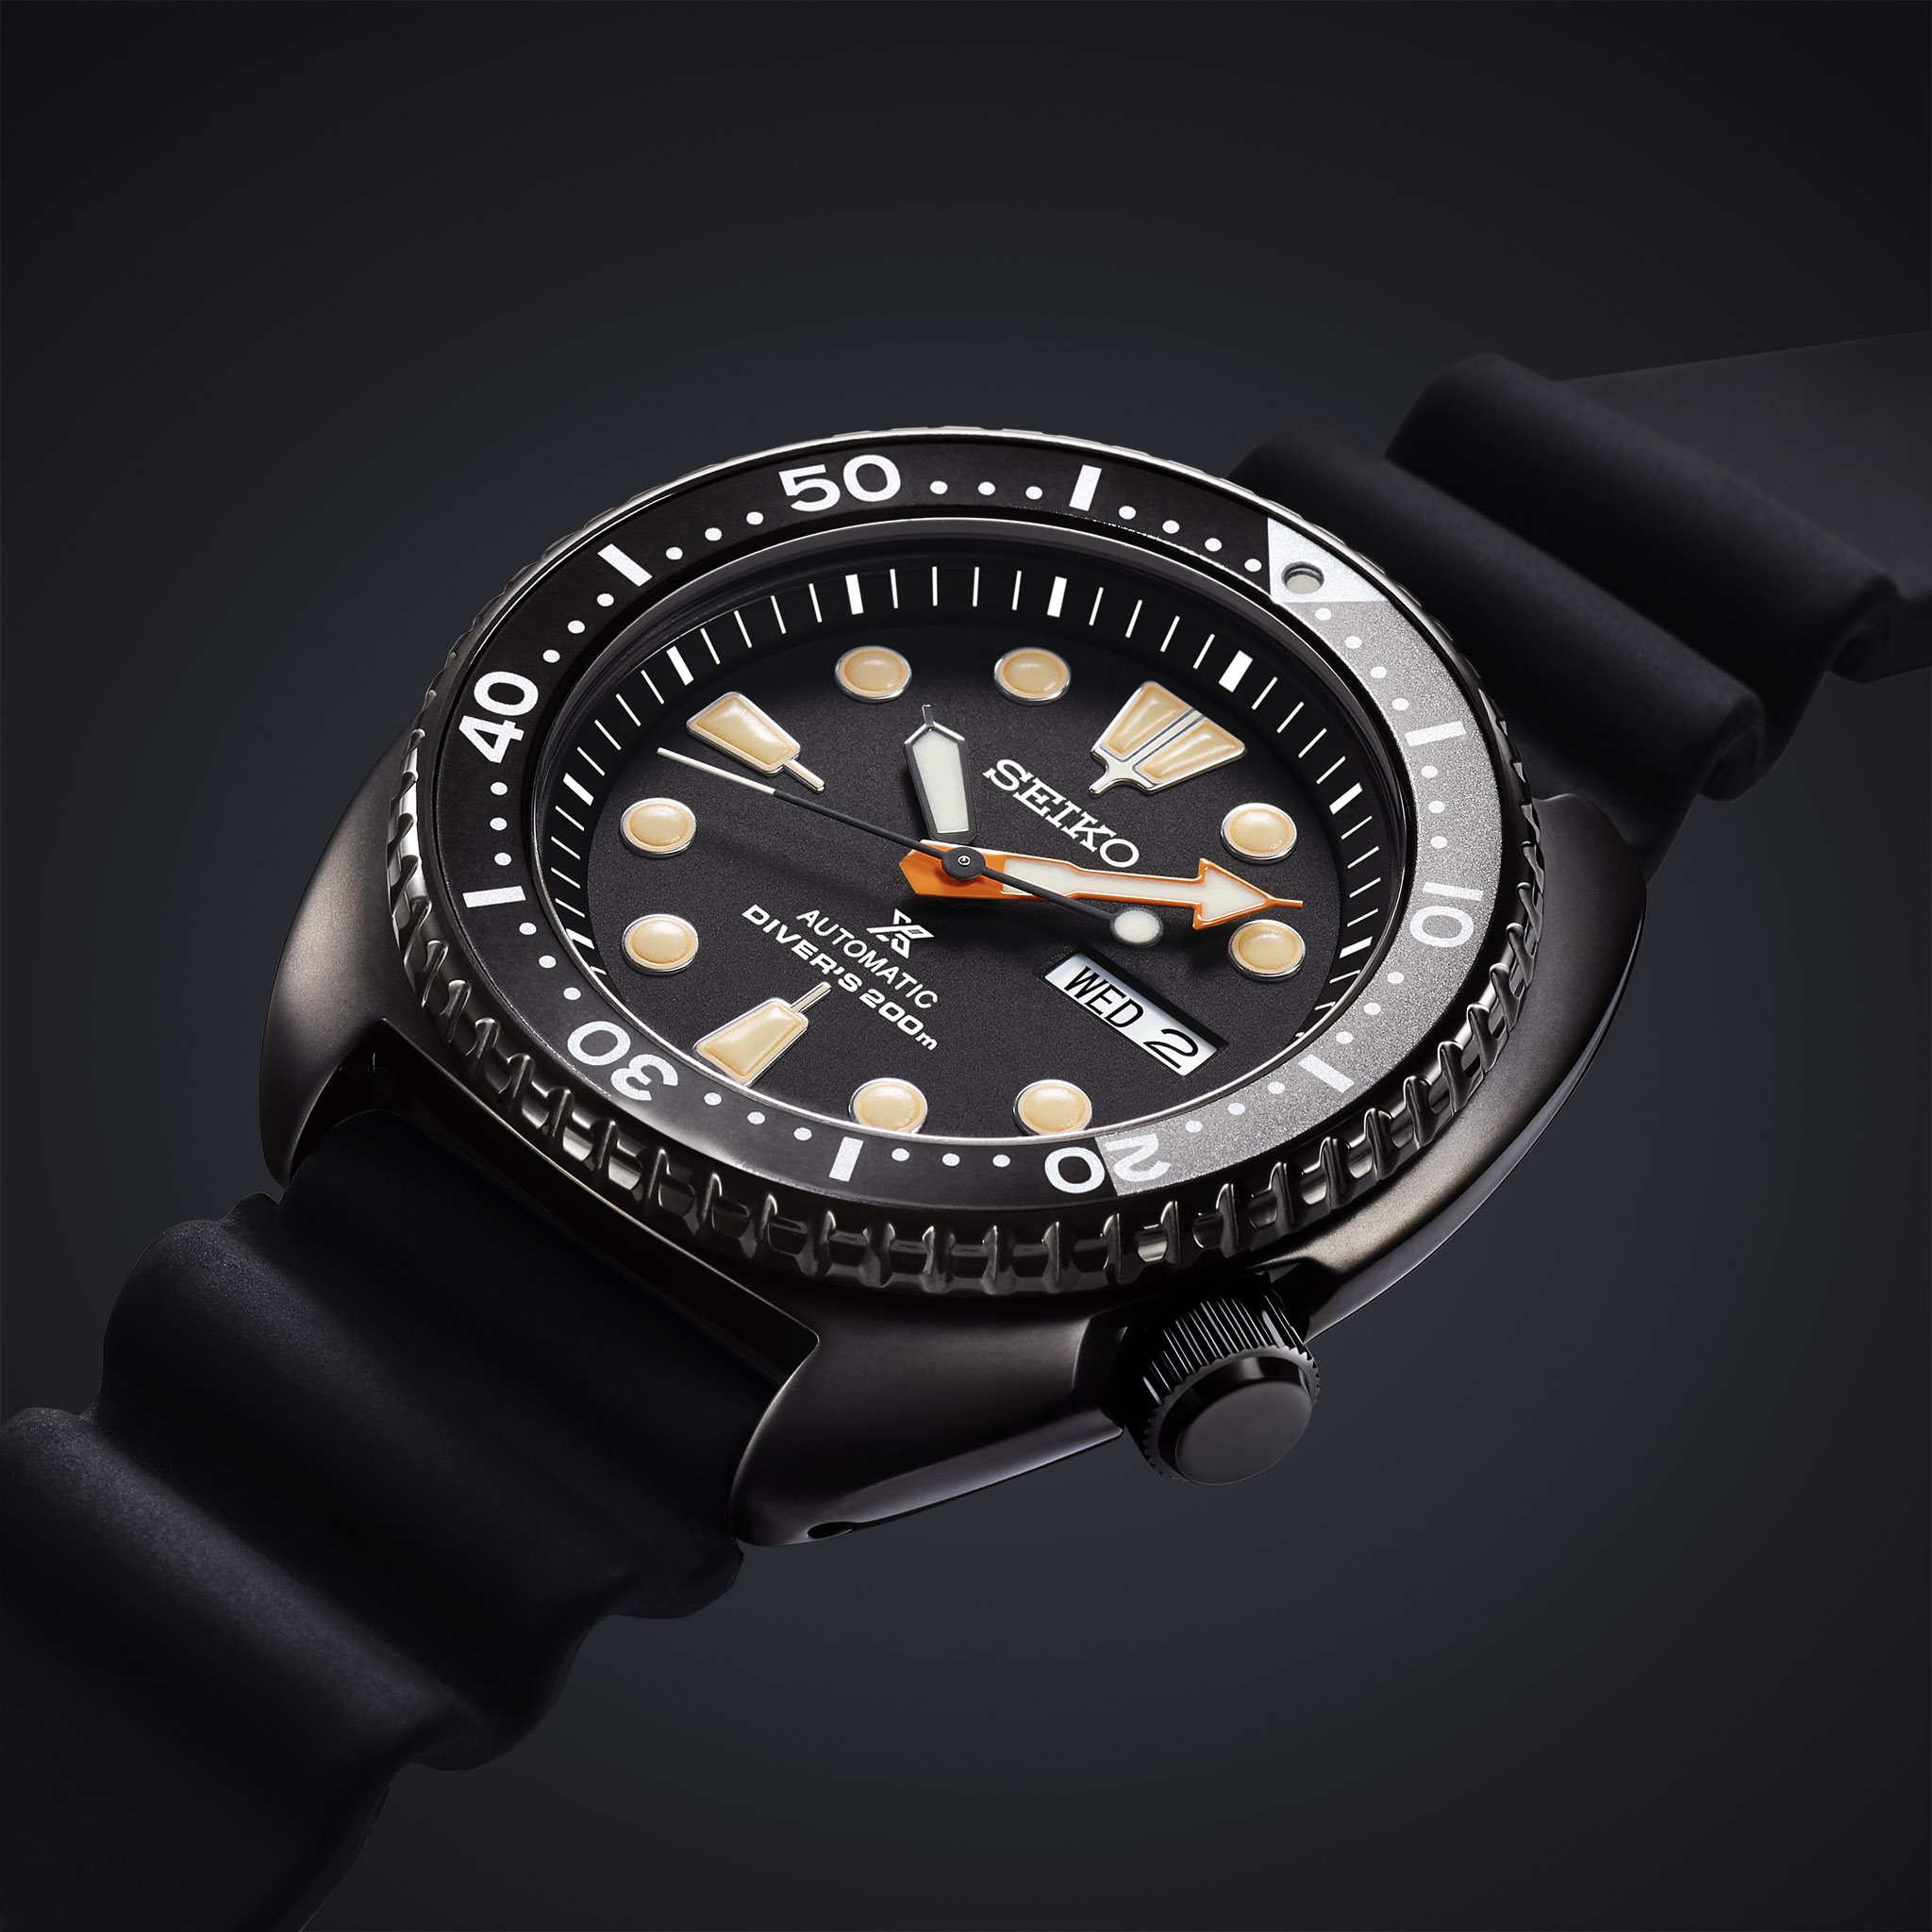 Seiko Inspired By Inky Ocean Depths For Black Series Of Prospex Dive Watches